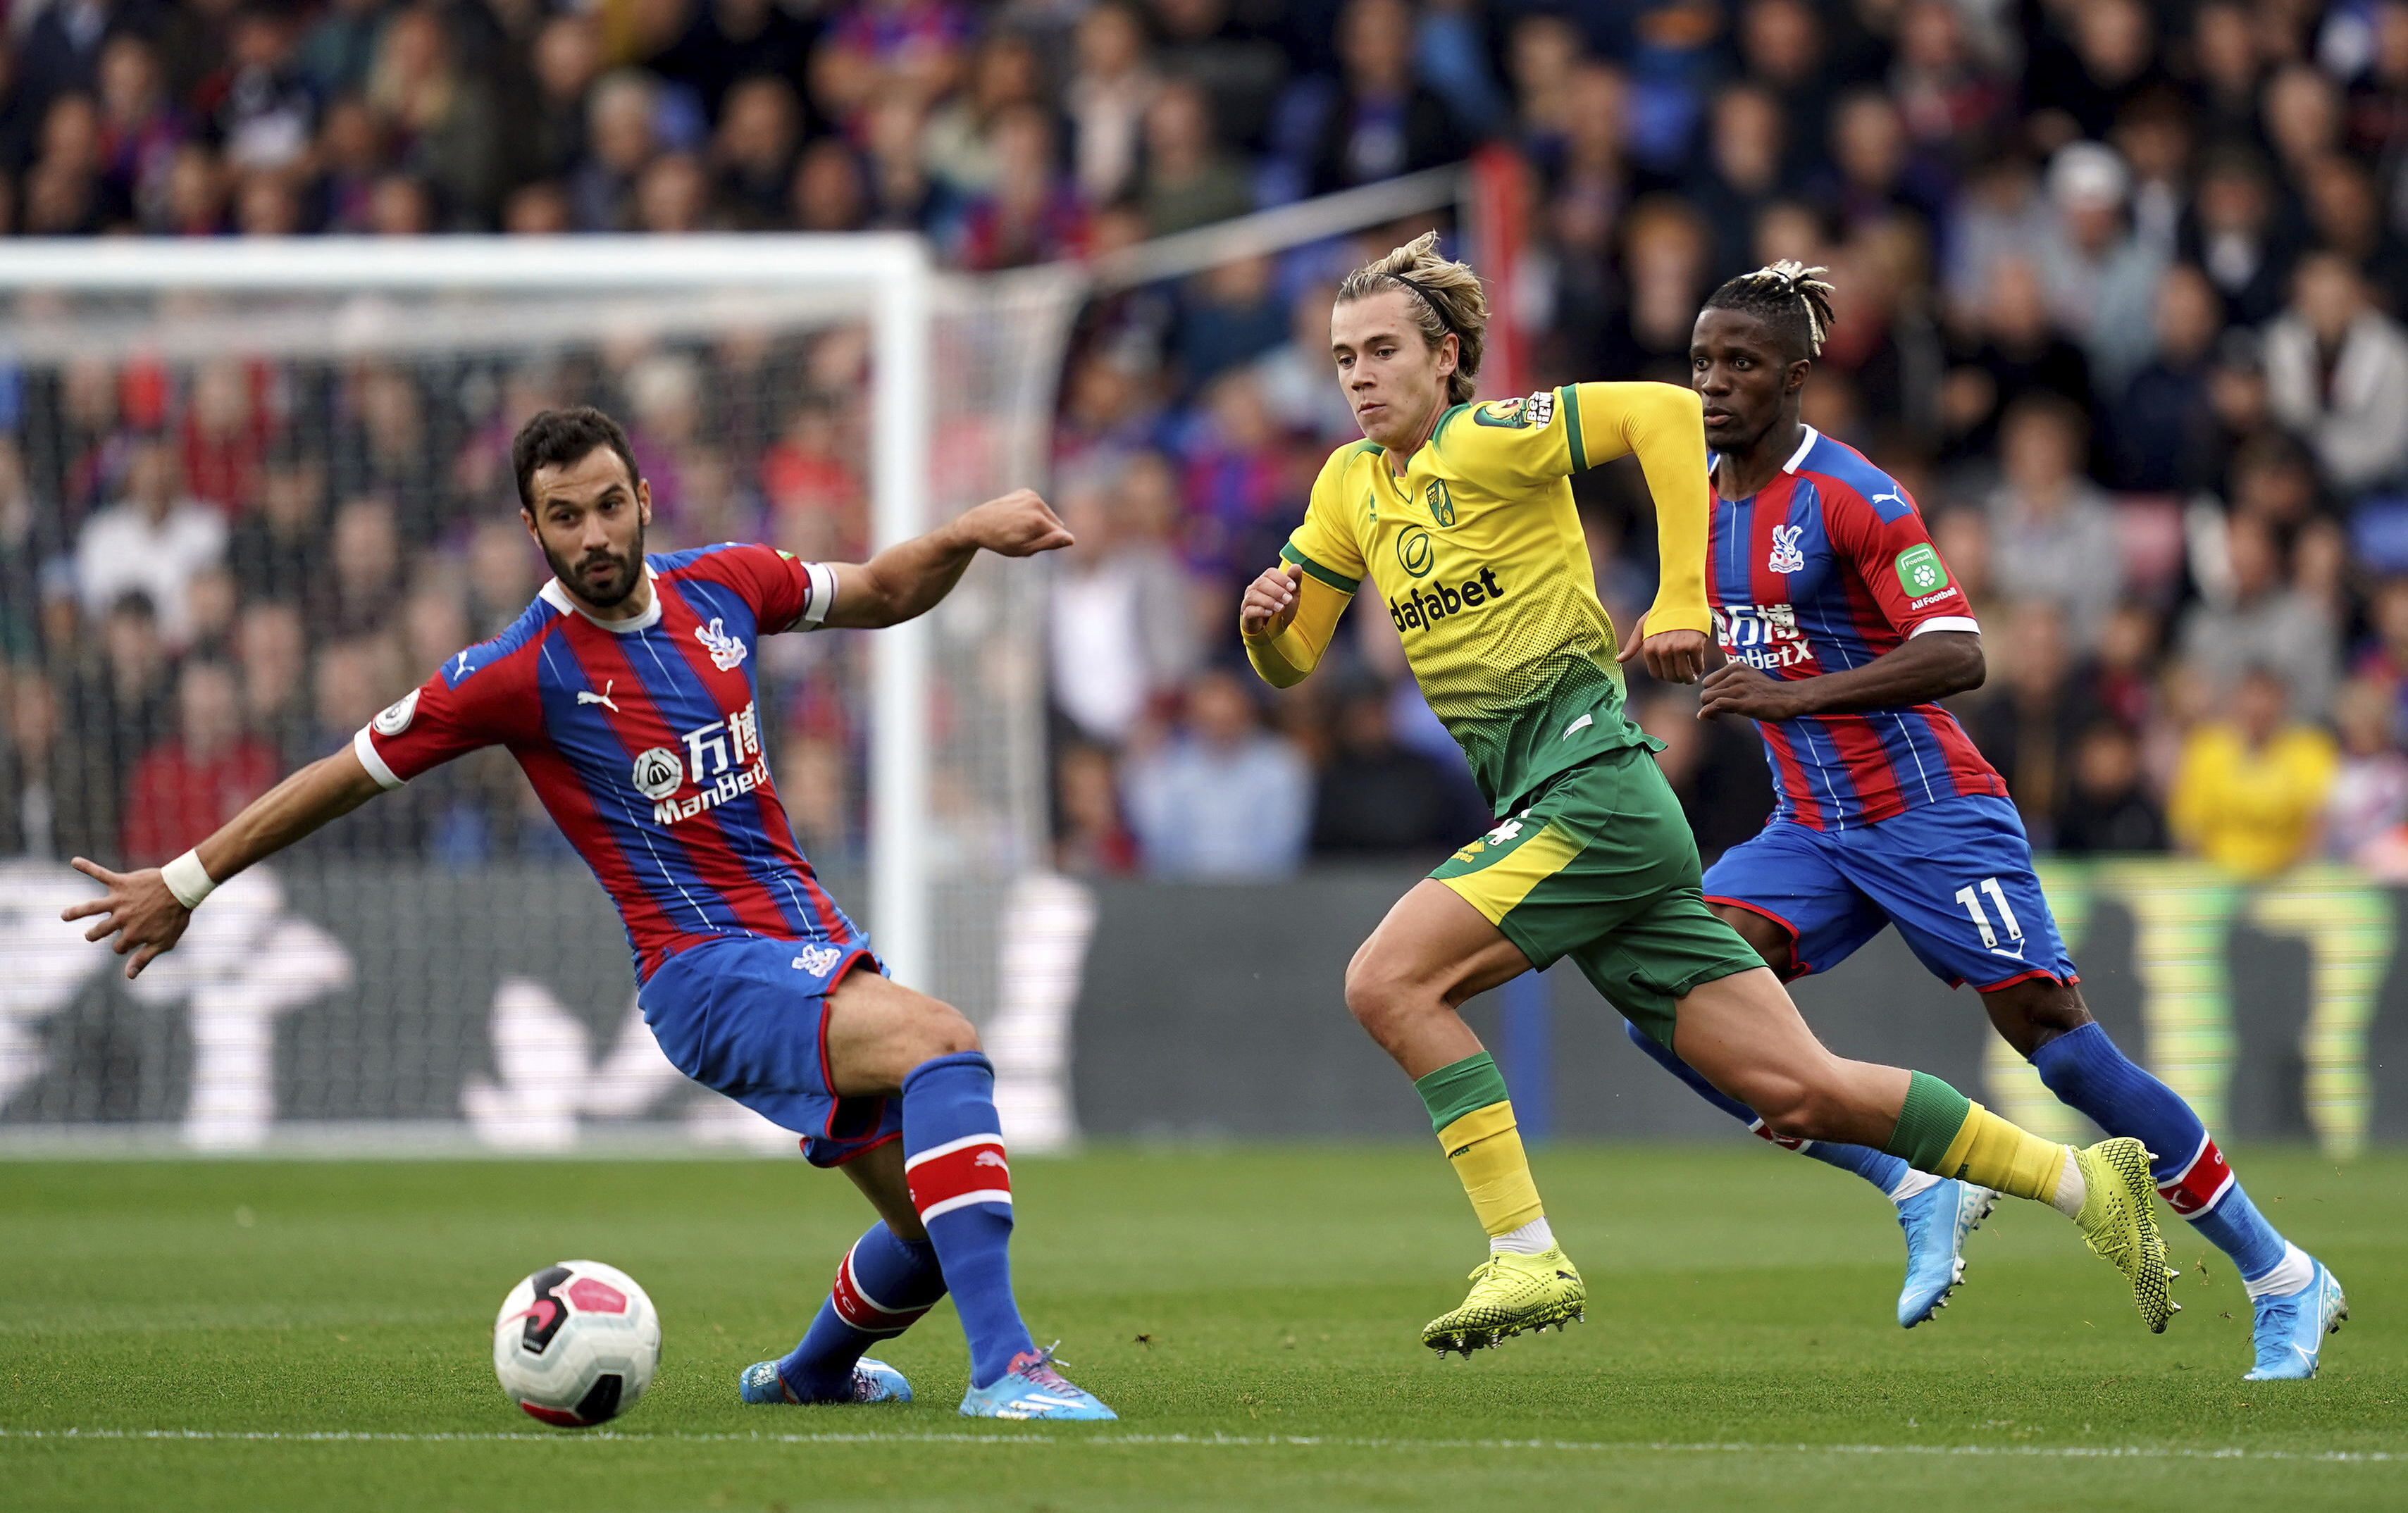 Palace wins 2-0 to hand Norwich more away pain